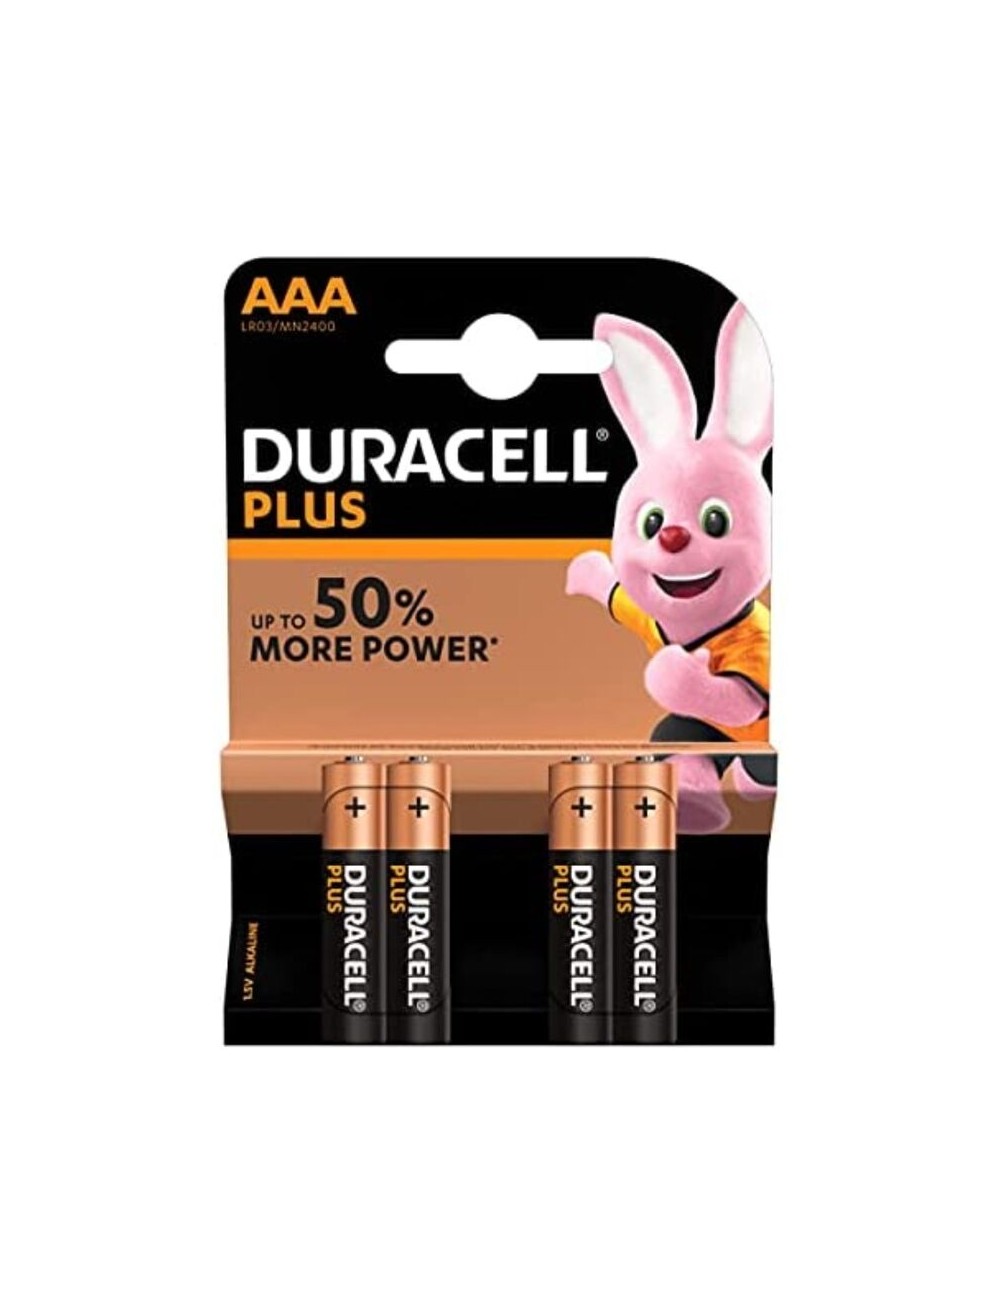 DURACELL PLUS POWER BATTERY AAA LR03 4 UNITS